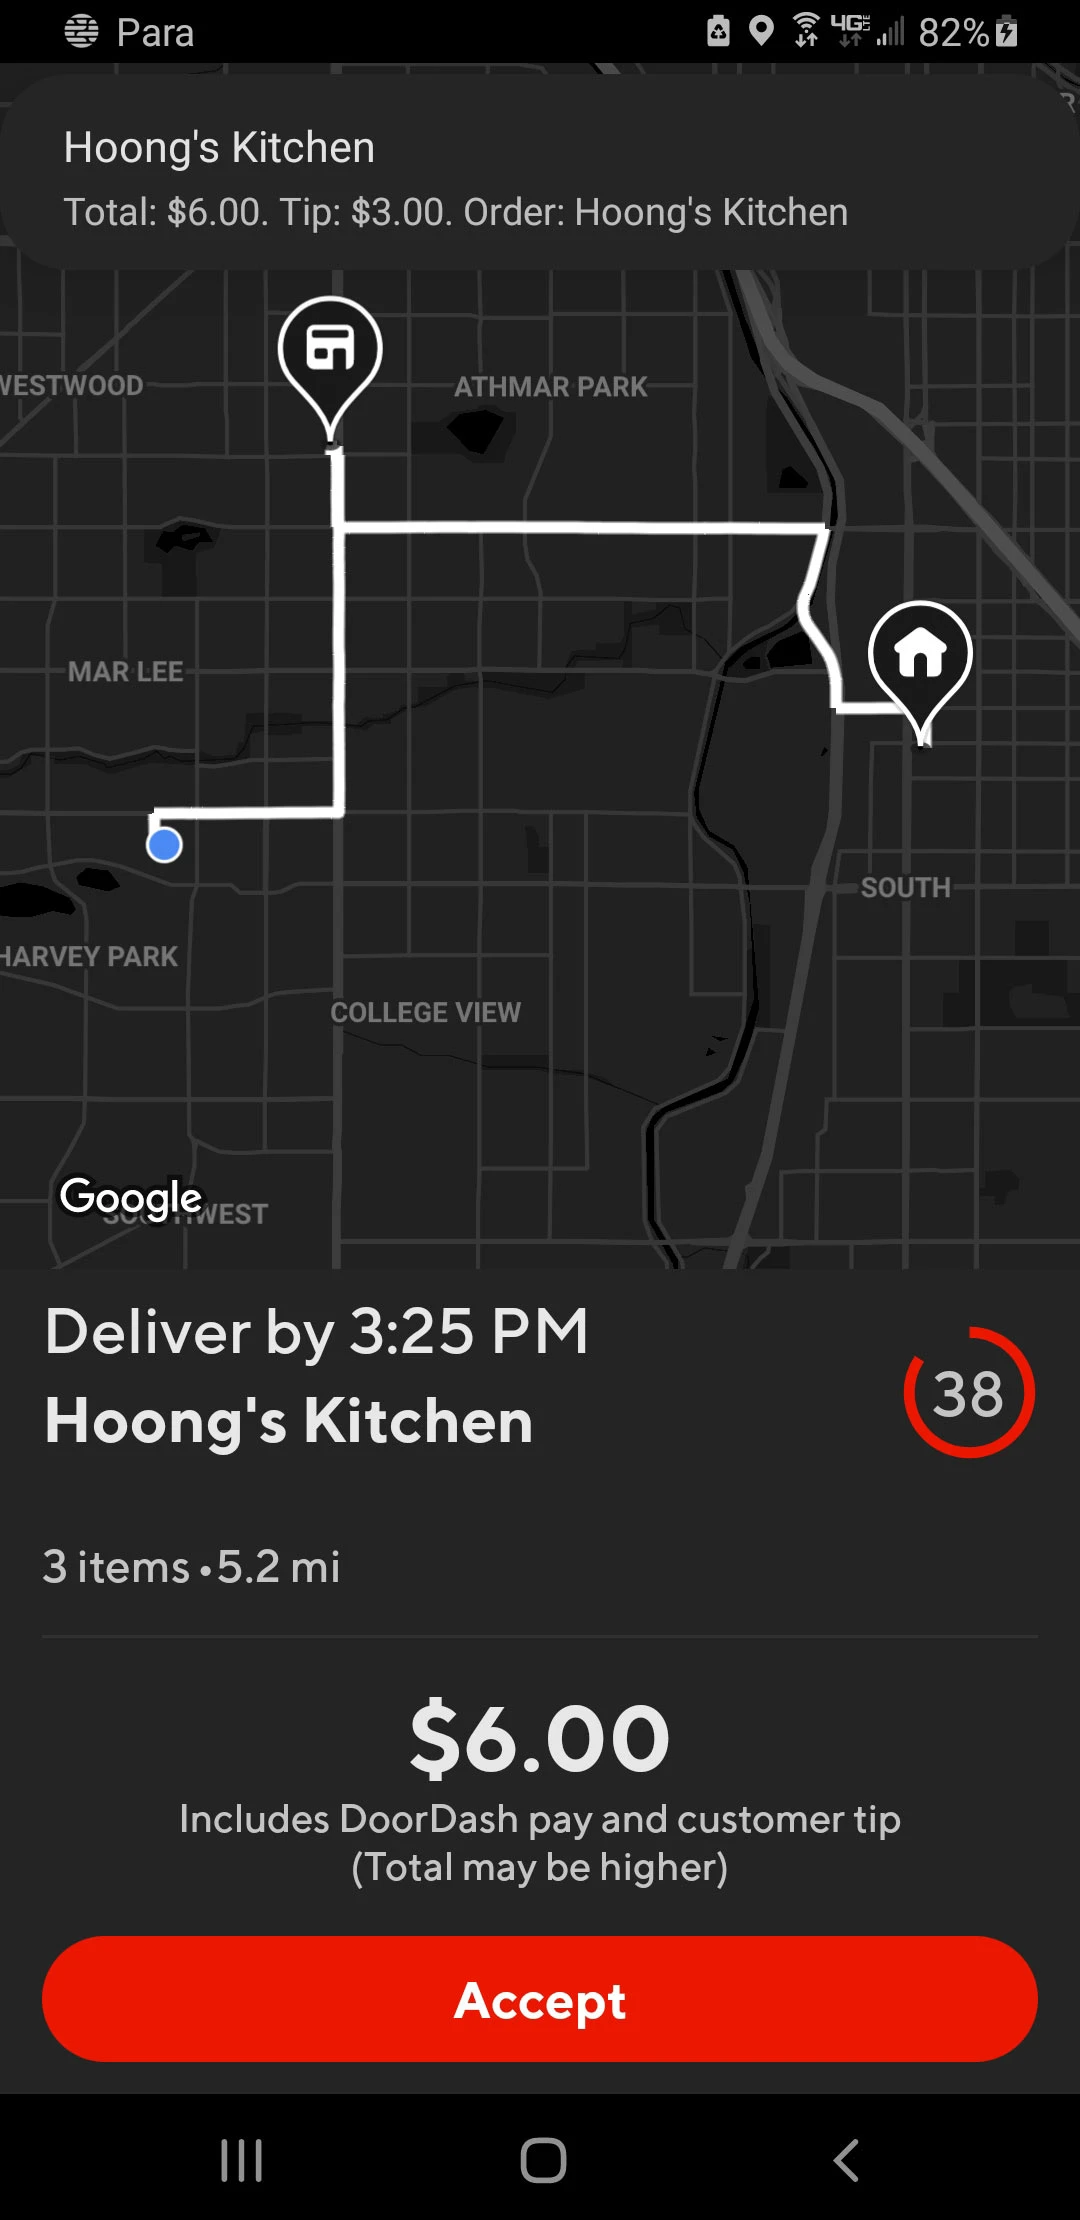 Screenshot of a delivery offer from Doordash, with notification overlaid from Para Tip Transparency showing the restaurant, total pay, and tip amount for the offer.